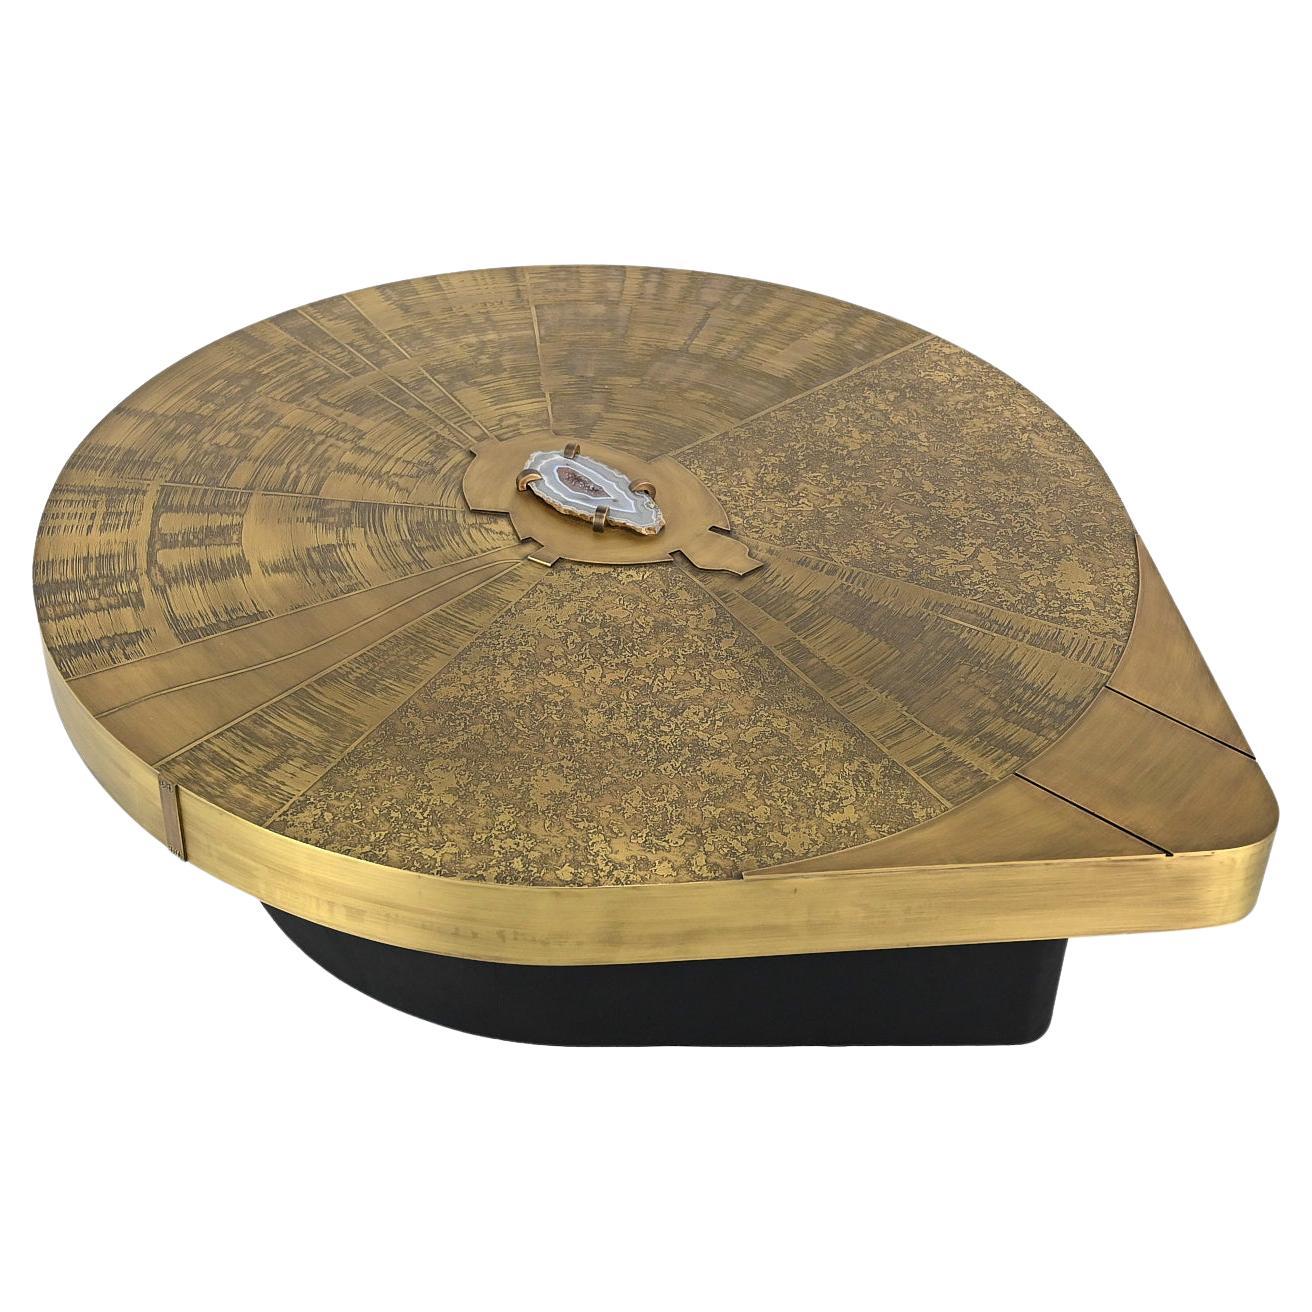 Freeform acid etched brass and agate stone coffee table